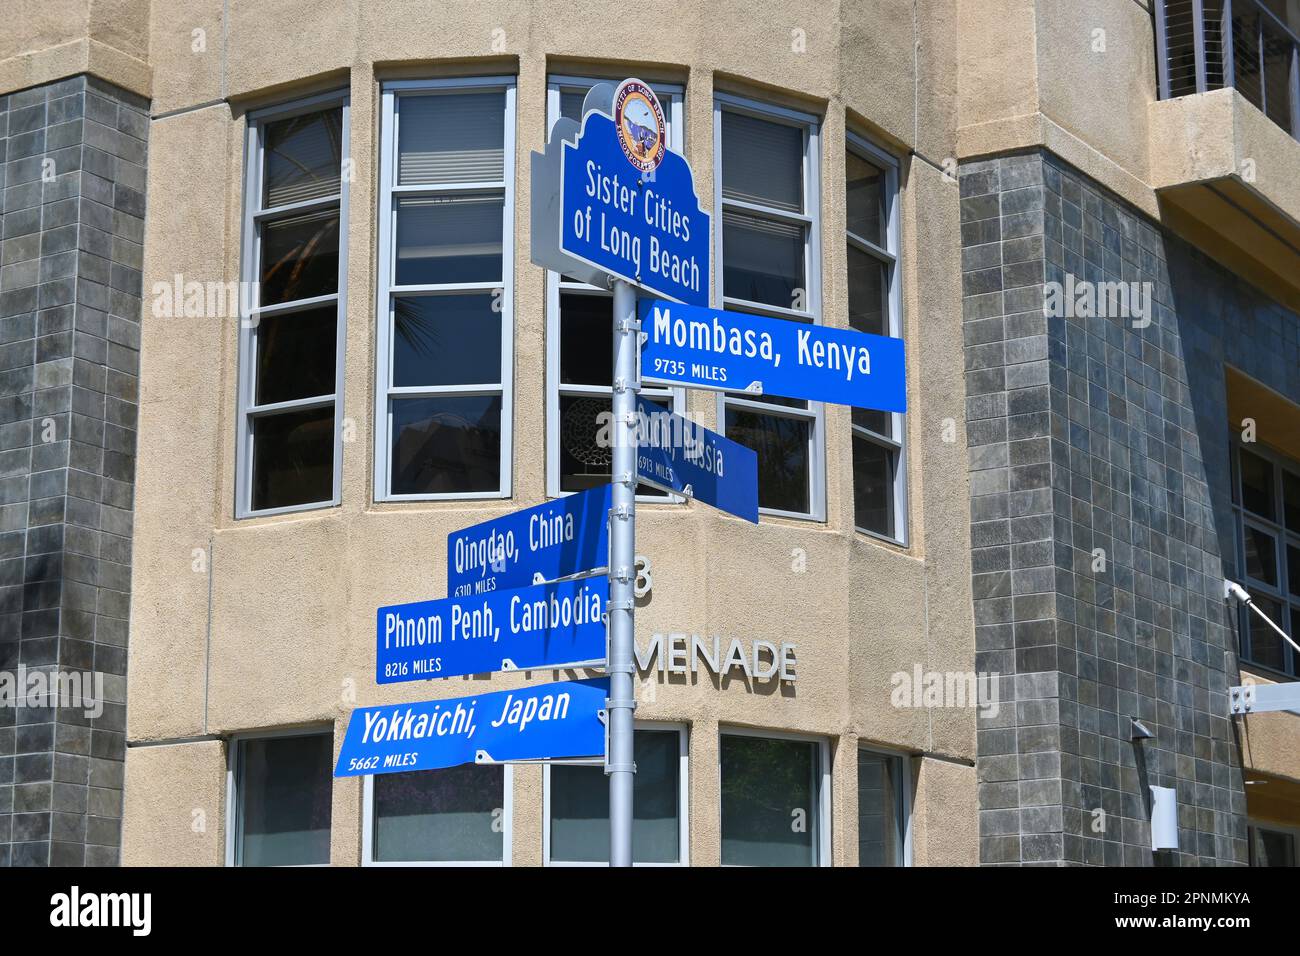 LONG BEACH, CALIFORNIA - 19 APR 2023: Street sign with the Sister Cities of Long Beach on the Promenade.. Stock Photo